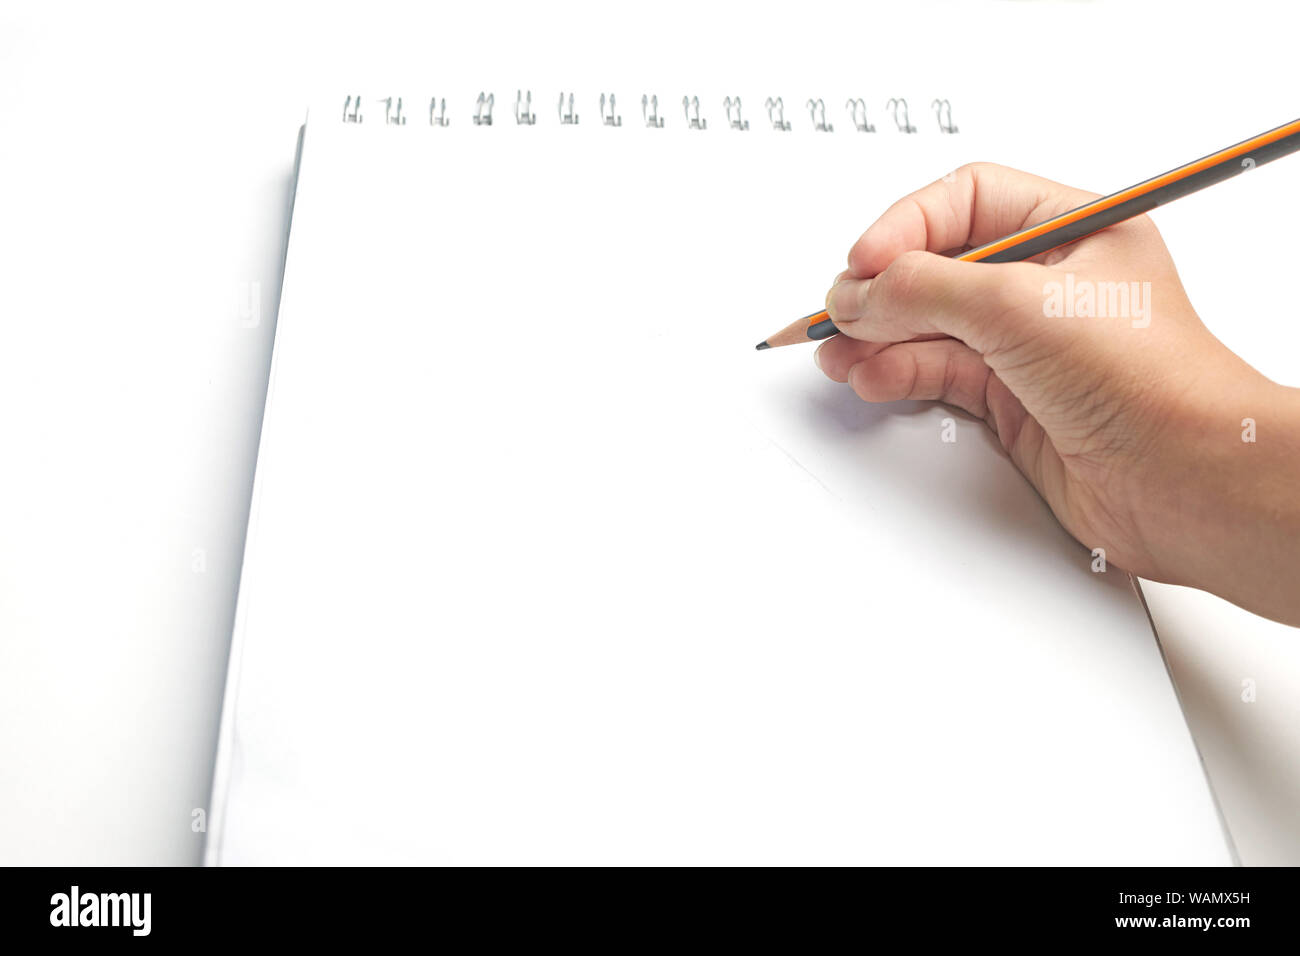 blank, template for drawing or sketching. Hand with pencil on a white album sheet ready to draw Stock Photo